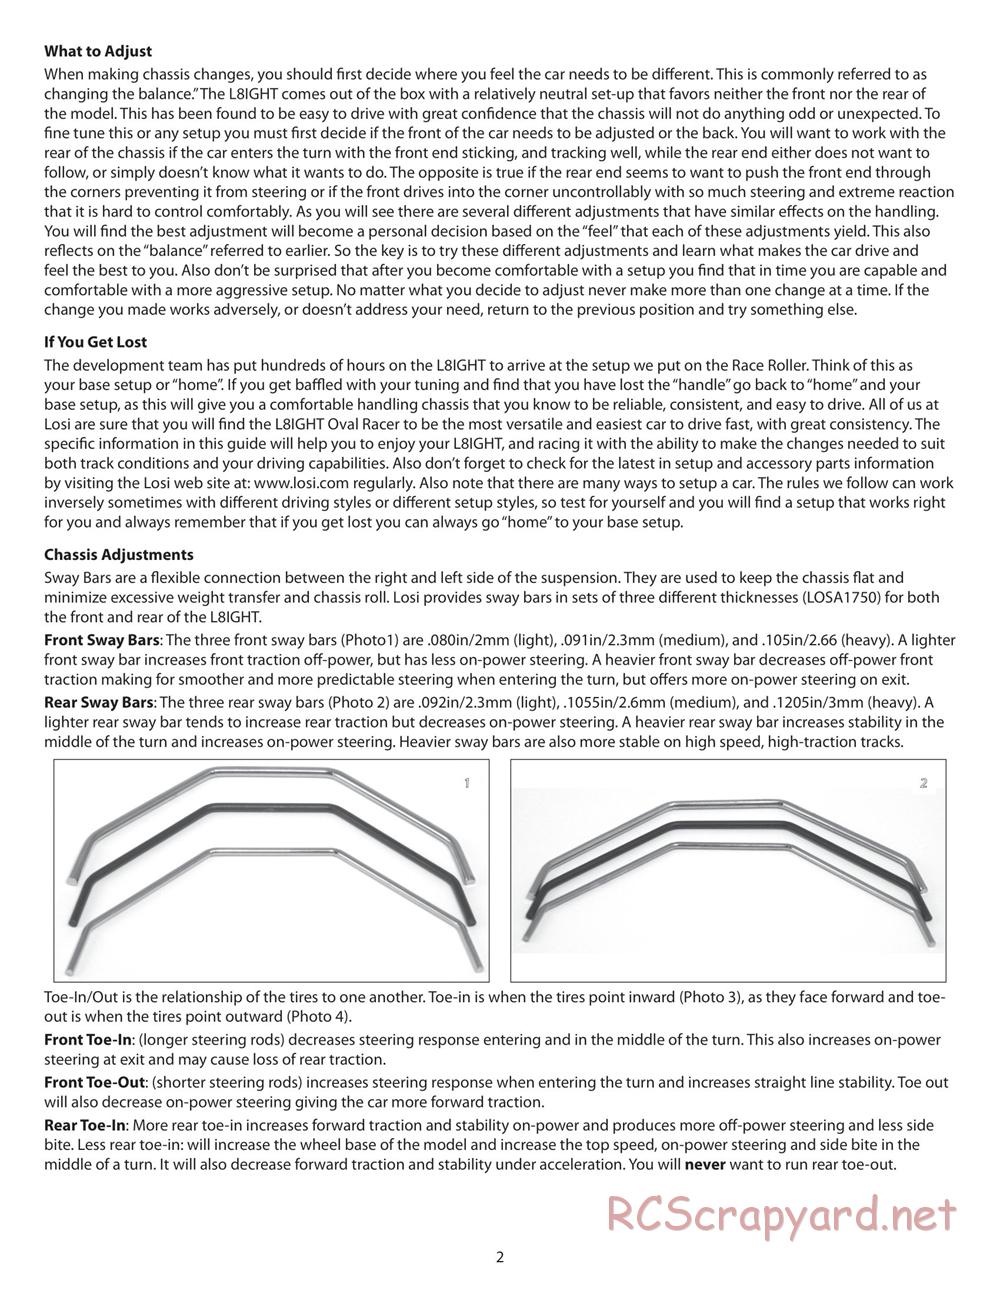 Team Losi - L8ight - Race Roller - Manual - Page 2